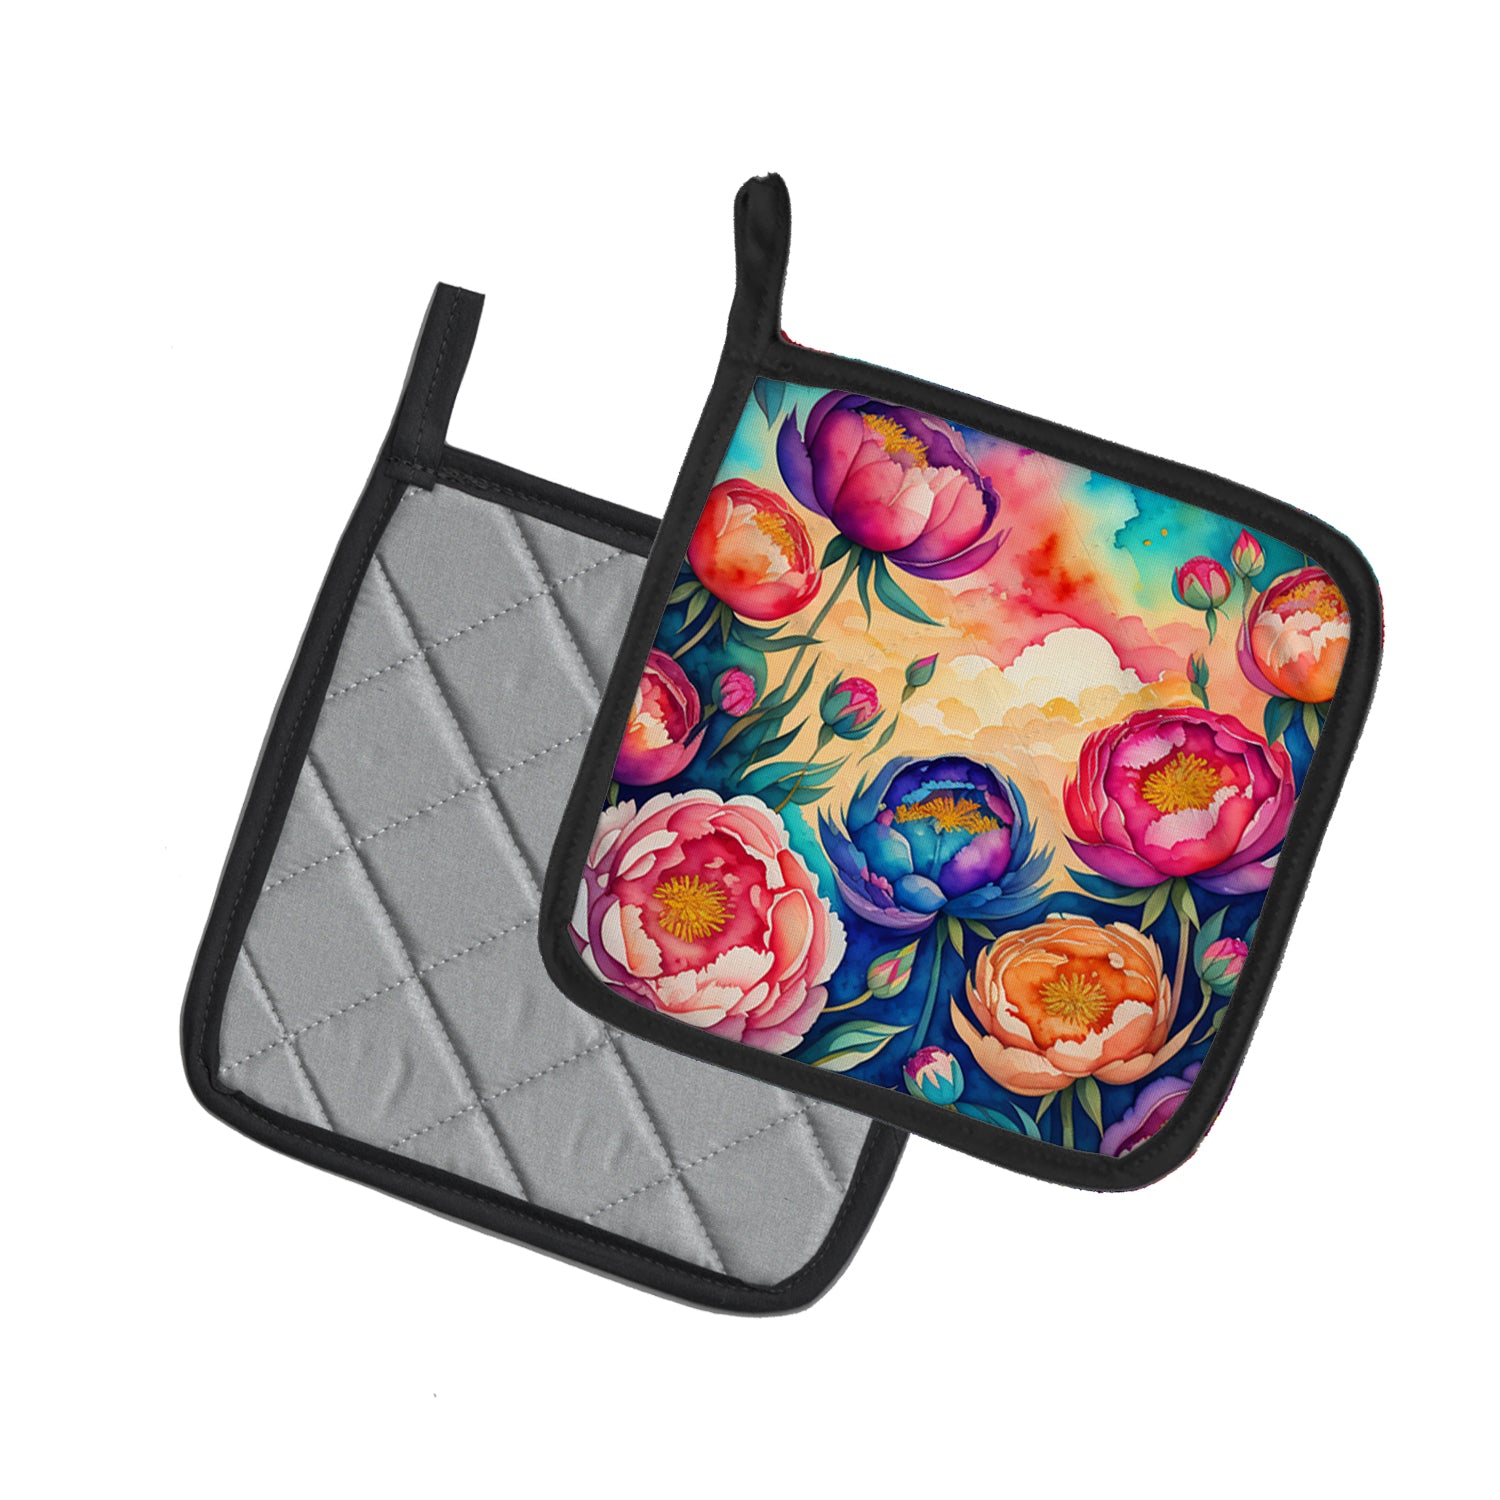 Buy this Colorful Peonies Pair of Pot Holders